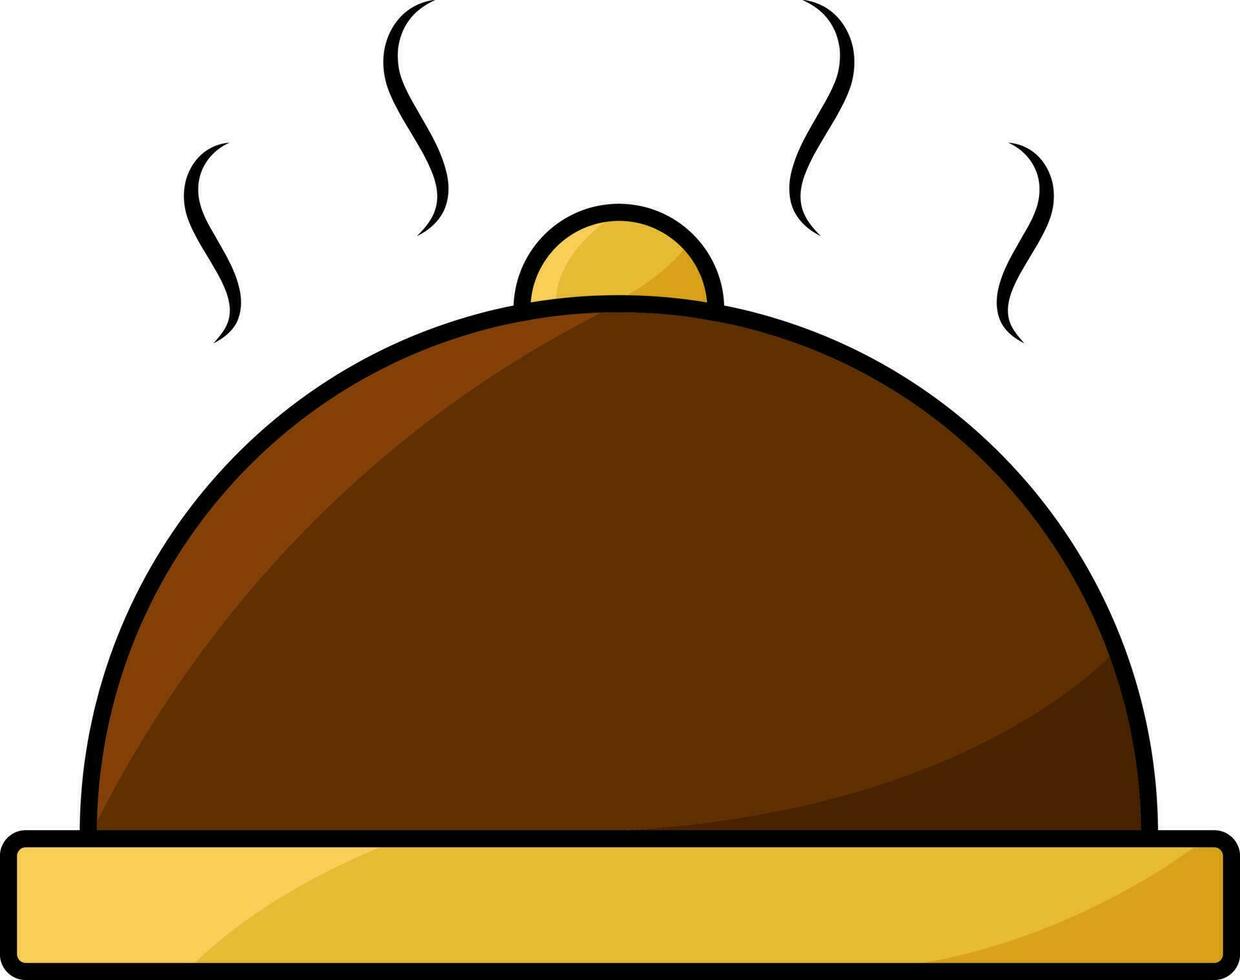 Flat Style Food Cloche Icon In Brown And Yellow Color. vector